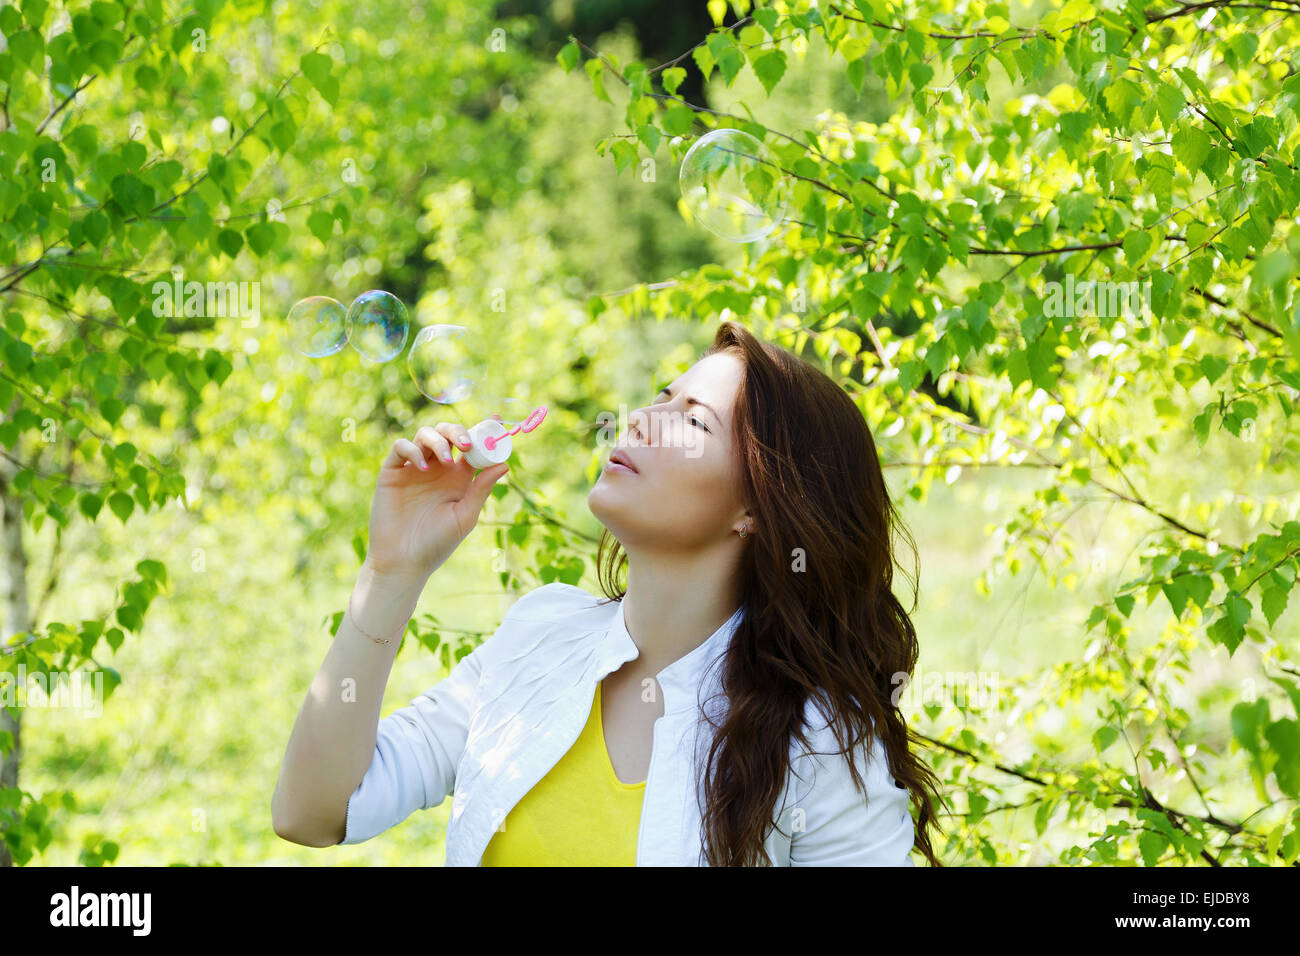 girl blow bubbles in spring forest Stock Photo